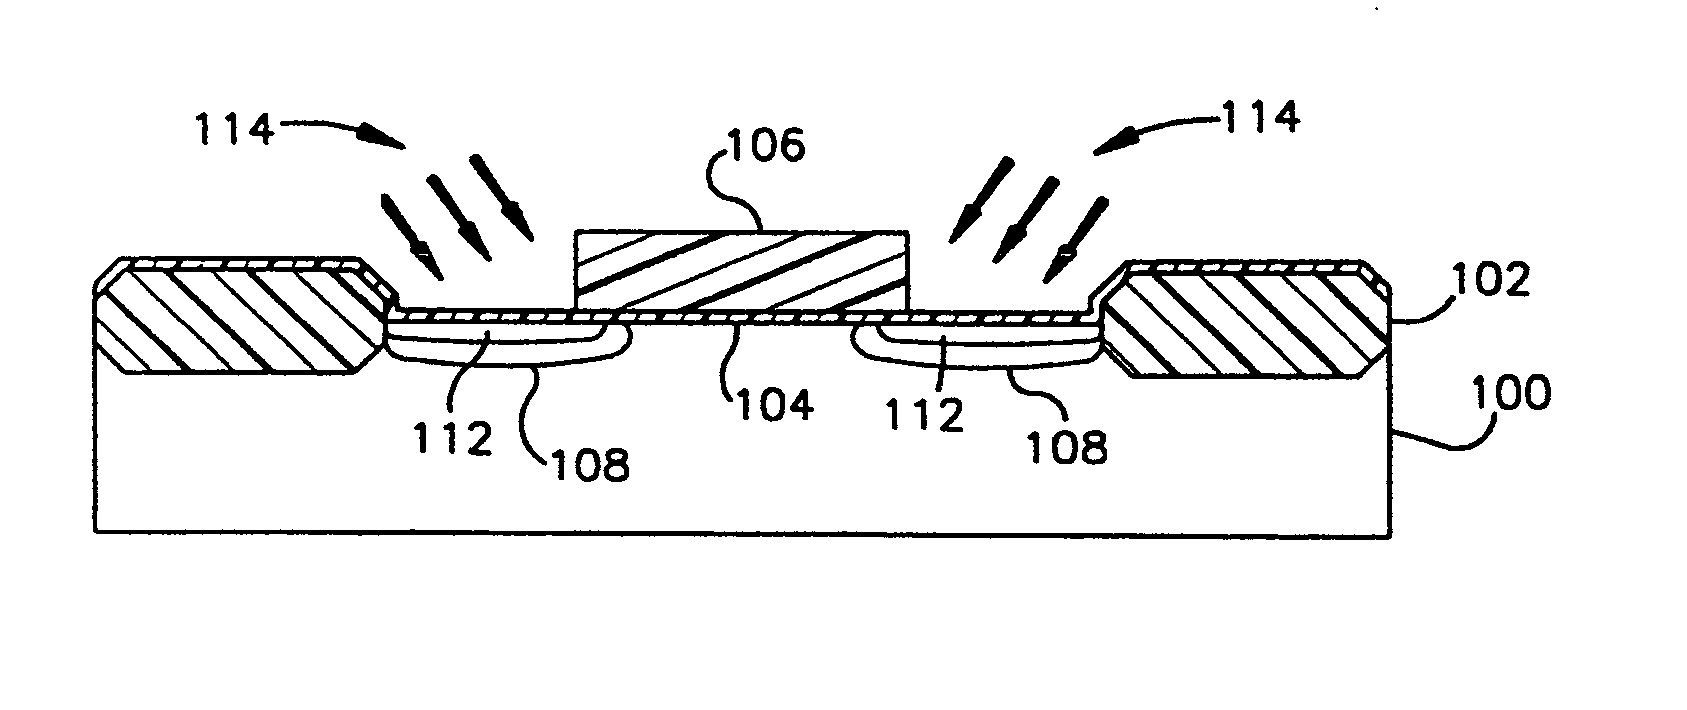 Reduction of channel hot carrier effects in transistor devices